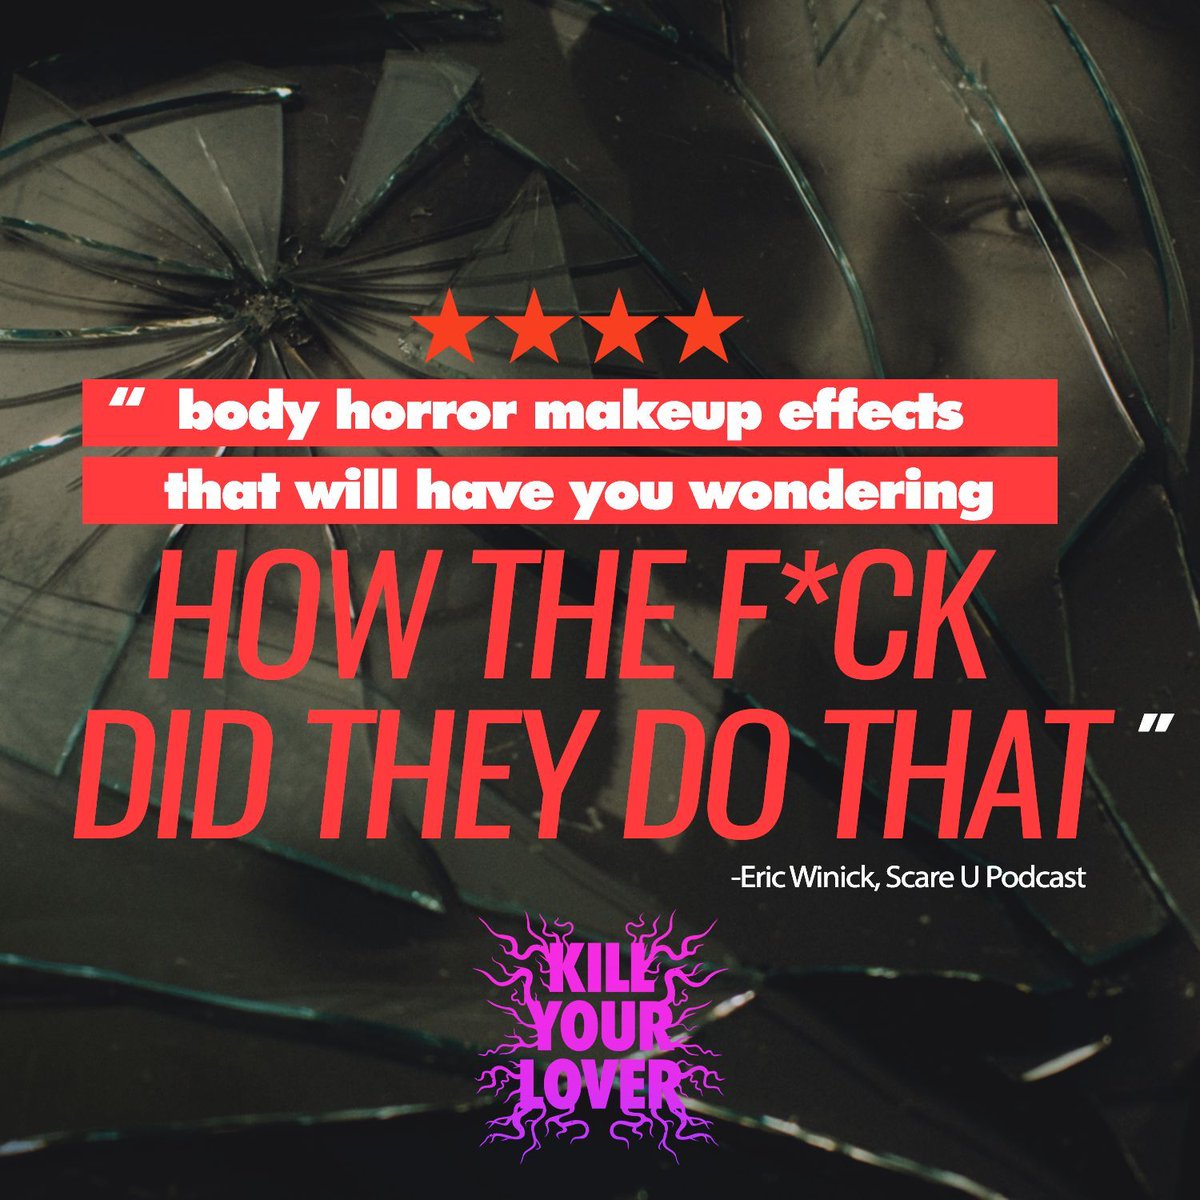 'Body horror makeup effects that will have you wondering how the f*ck did they do that' - Eric Winick, Scare U Pod KILL YOUR LOVER is currently at 100% on @rottentomatoes! In select theaters & on digital June 7. #KillYourLoverMovie #moviereview #rottentomatoes #horrorcommunity